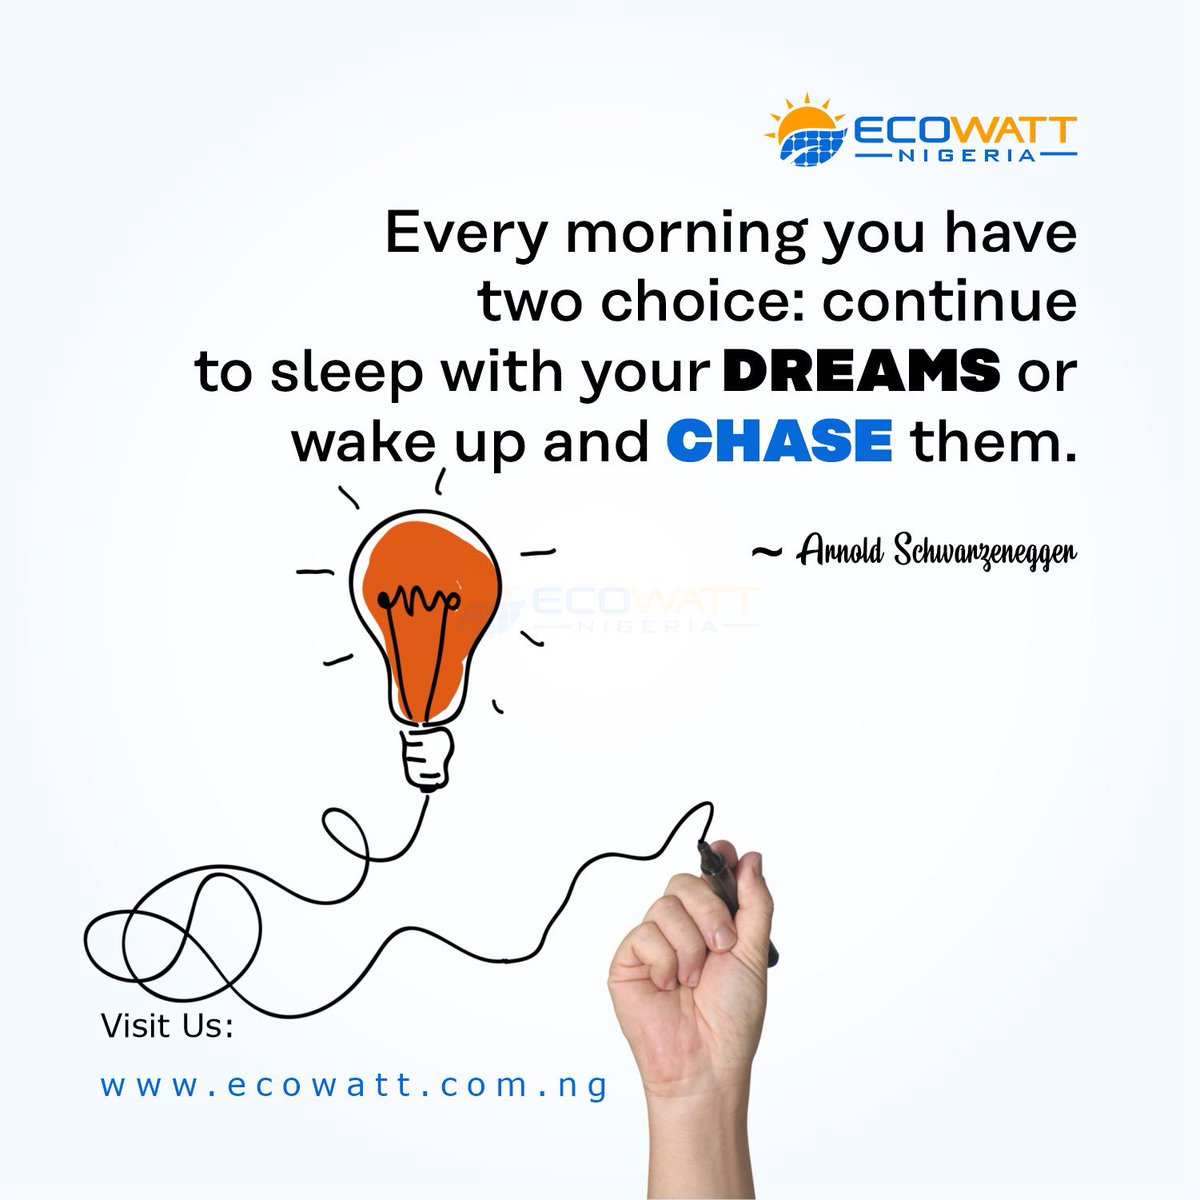 Chase your dreams relentlessly, for in the pursuit lies the magic of discovery. 
#exowatt #MotivationalQuotes #newweek